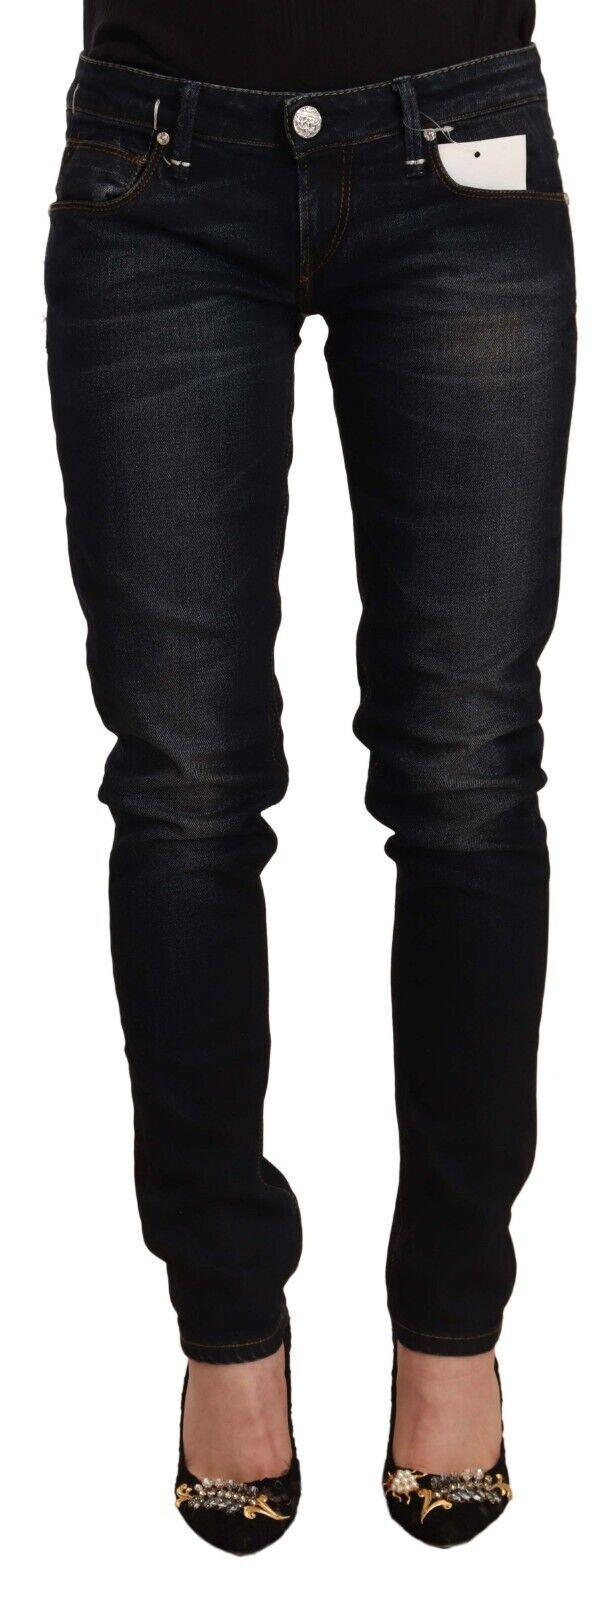 Acht Women's Black Washed Cotton Low Waist Slim Fit Denim Jeans - Designed by Acht Available to Buy at a Discounted Price on Moon Behind The Hill Online Designer Discount Store